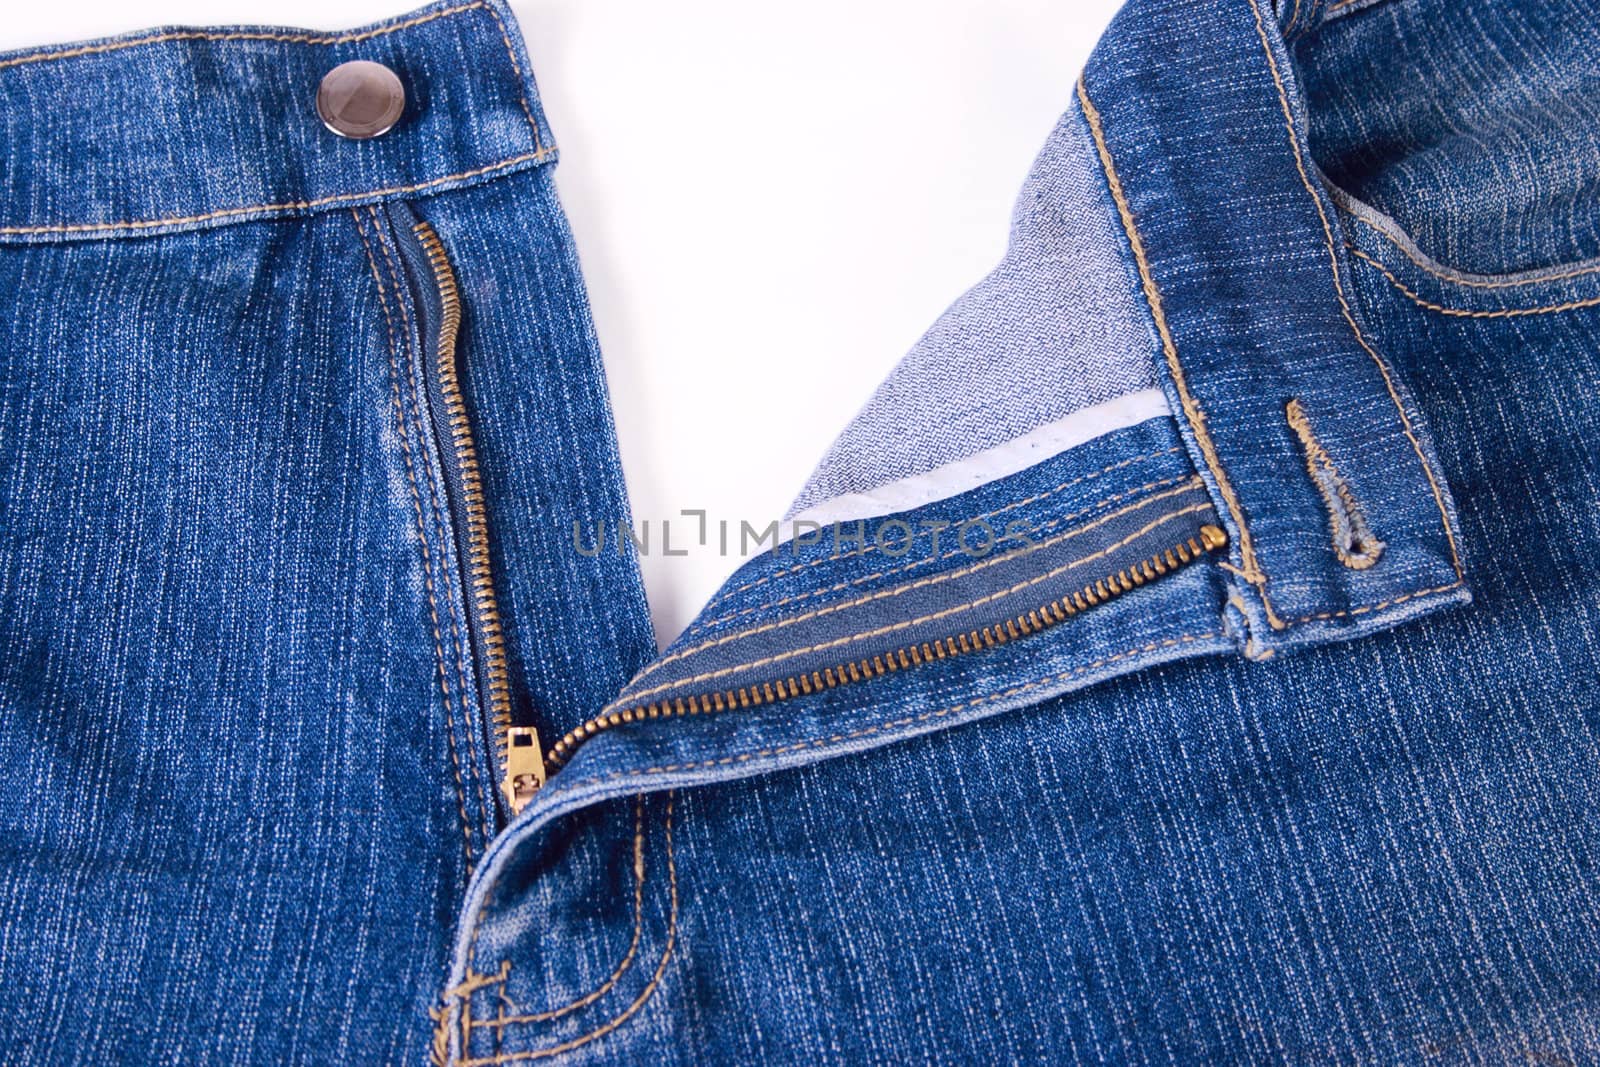 Dark blue jeans with an open fly removed close up on a white background. Are not isolated.